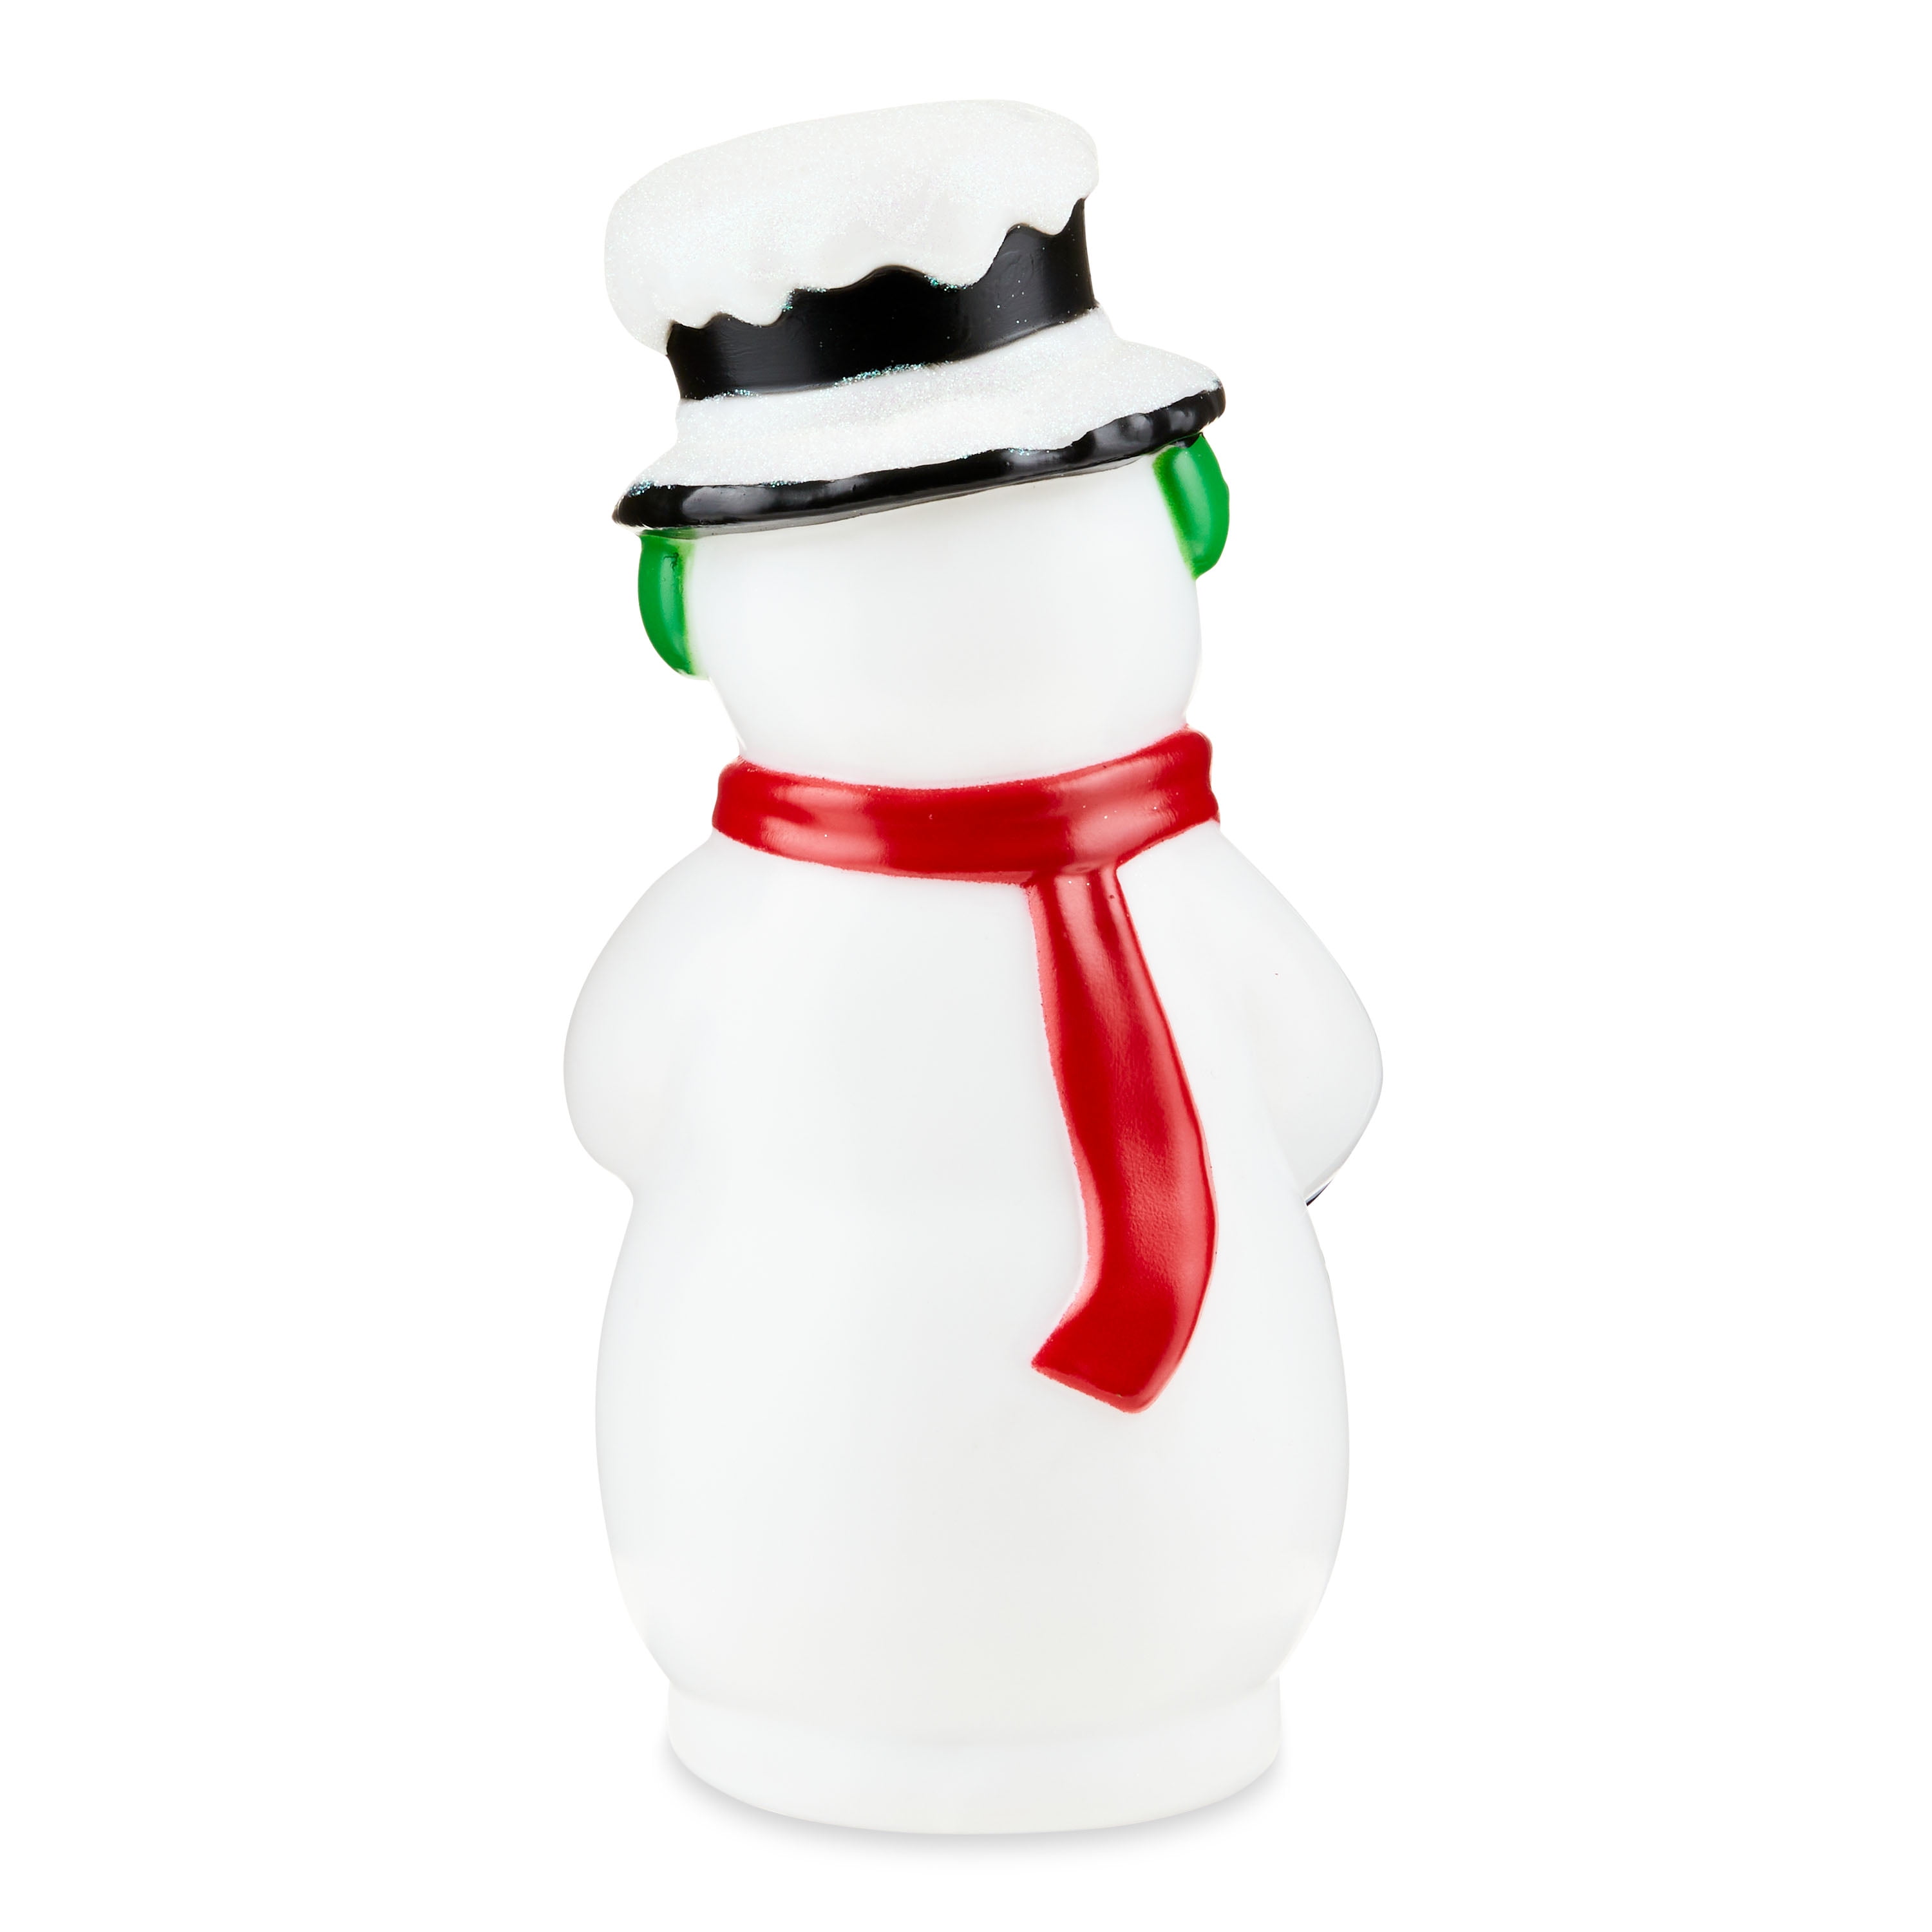 Mercer Holiday Snowman Party Bowl + Reviews